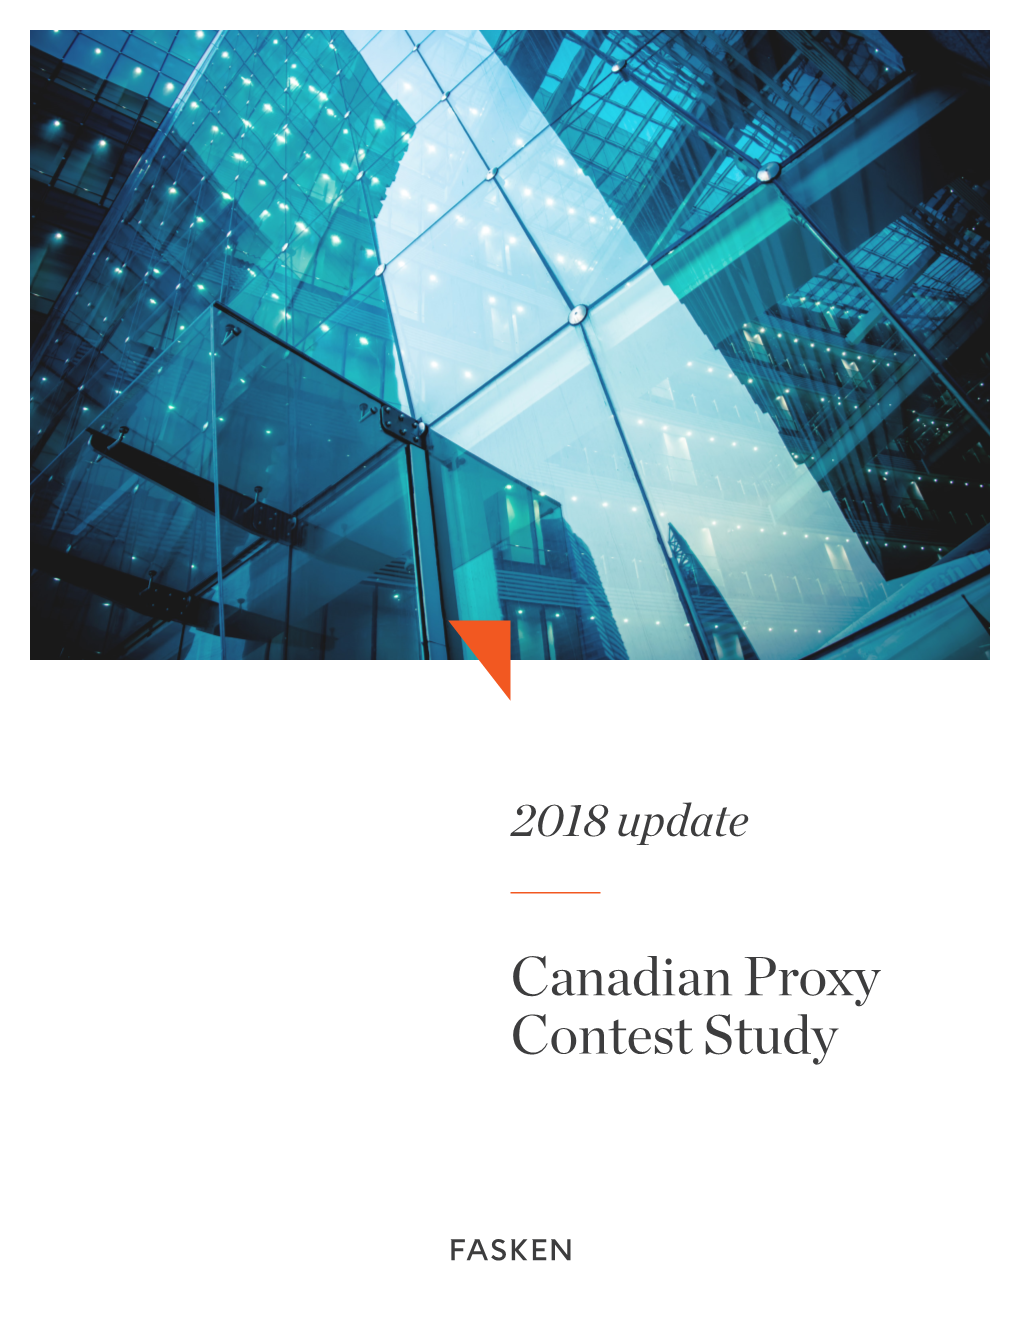 Canadian Proxy Contest Study About Fasken